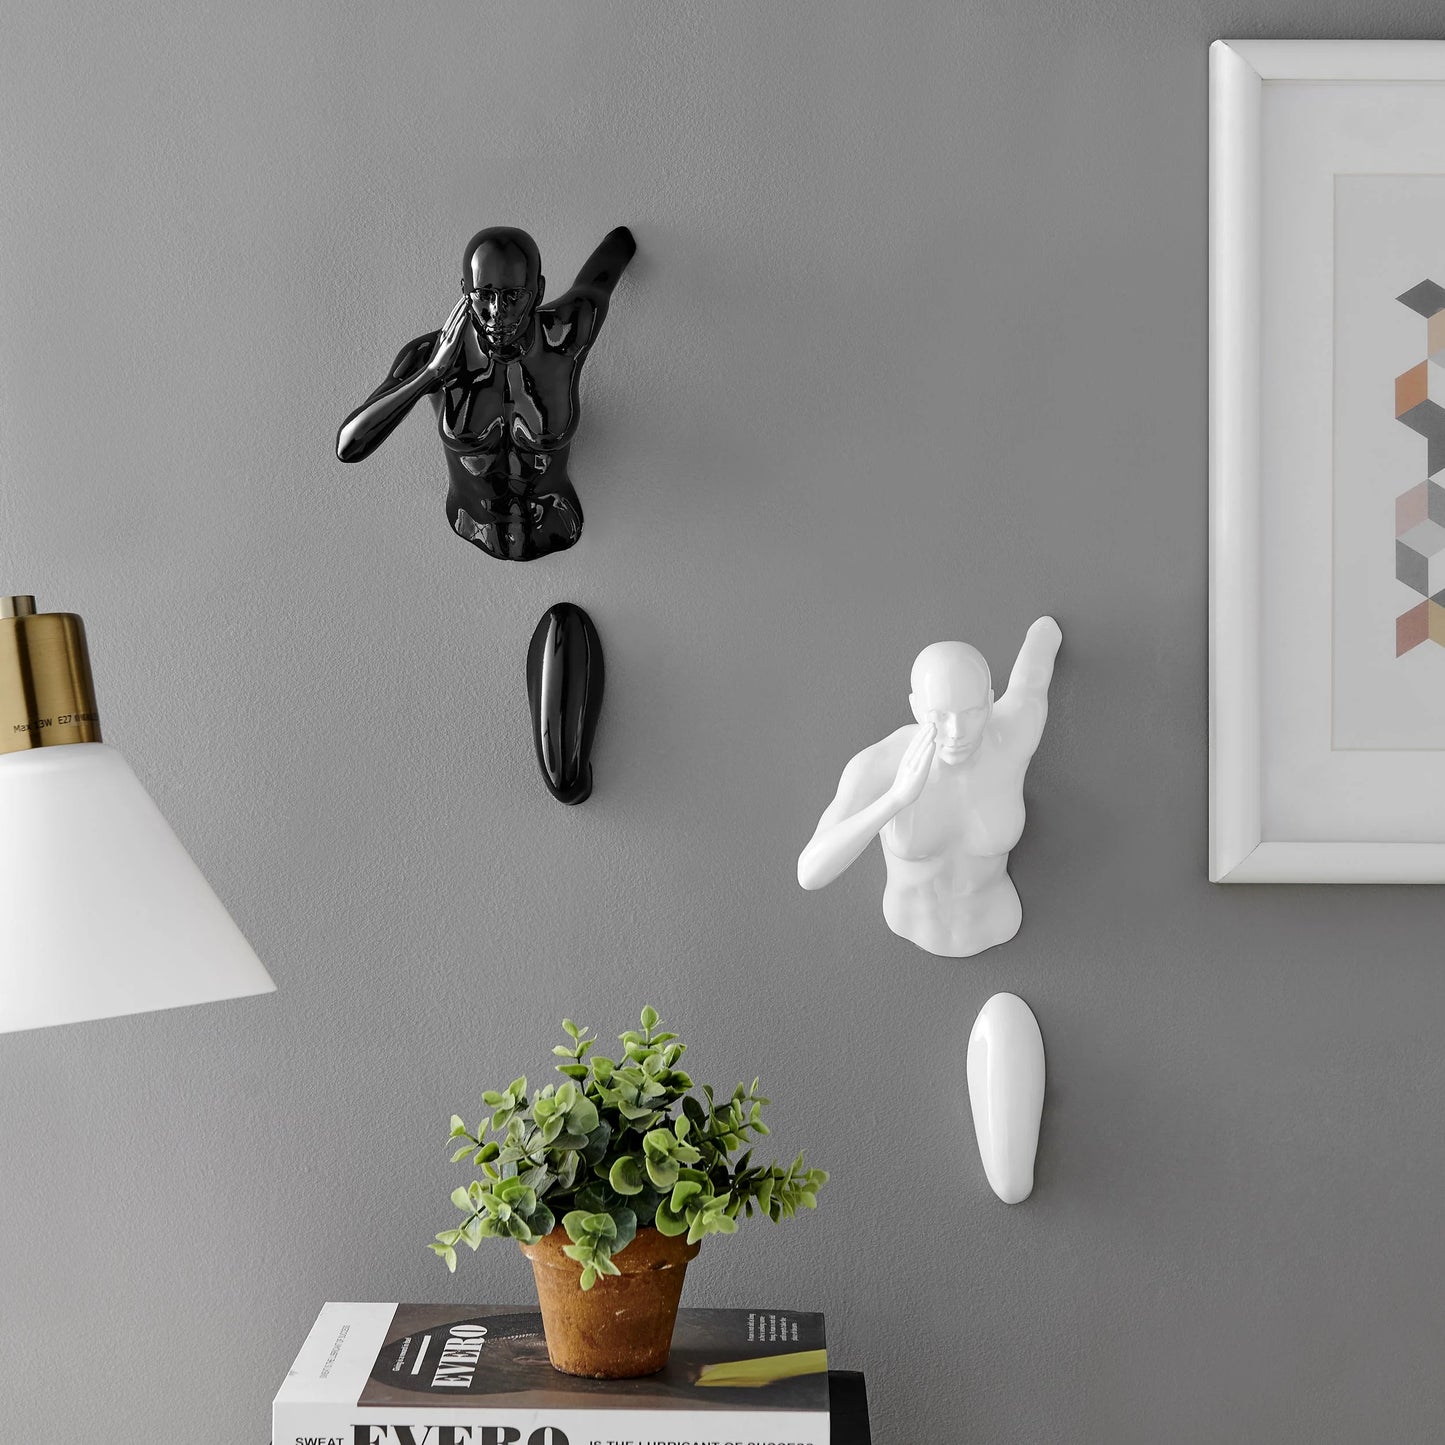 Finesse Decor Two Women Wall Runner Sculptures - Black and White 2